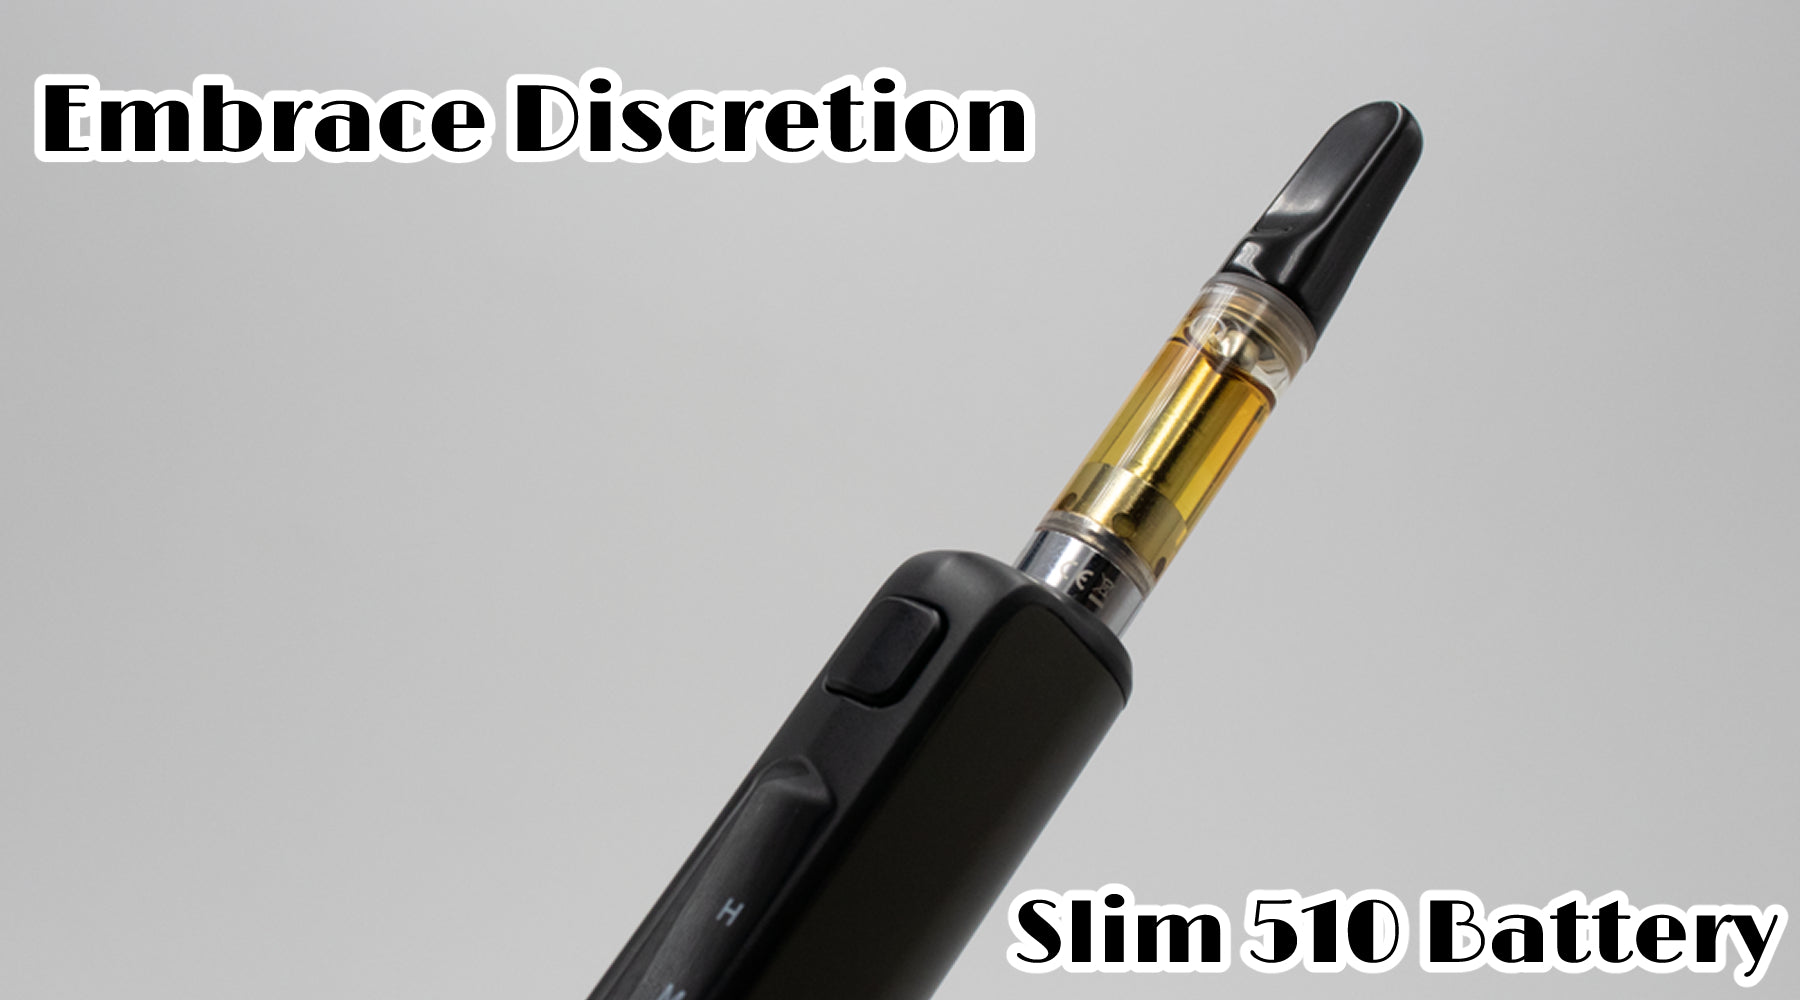 Embrace Discretion with the Slim 510 Battery